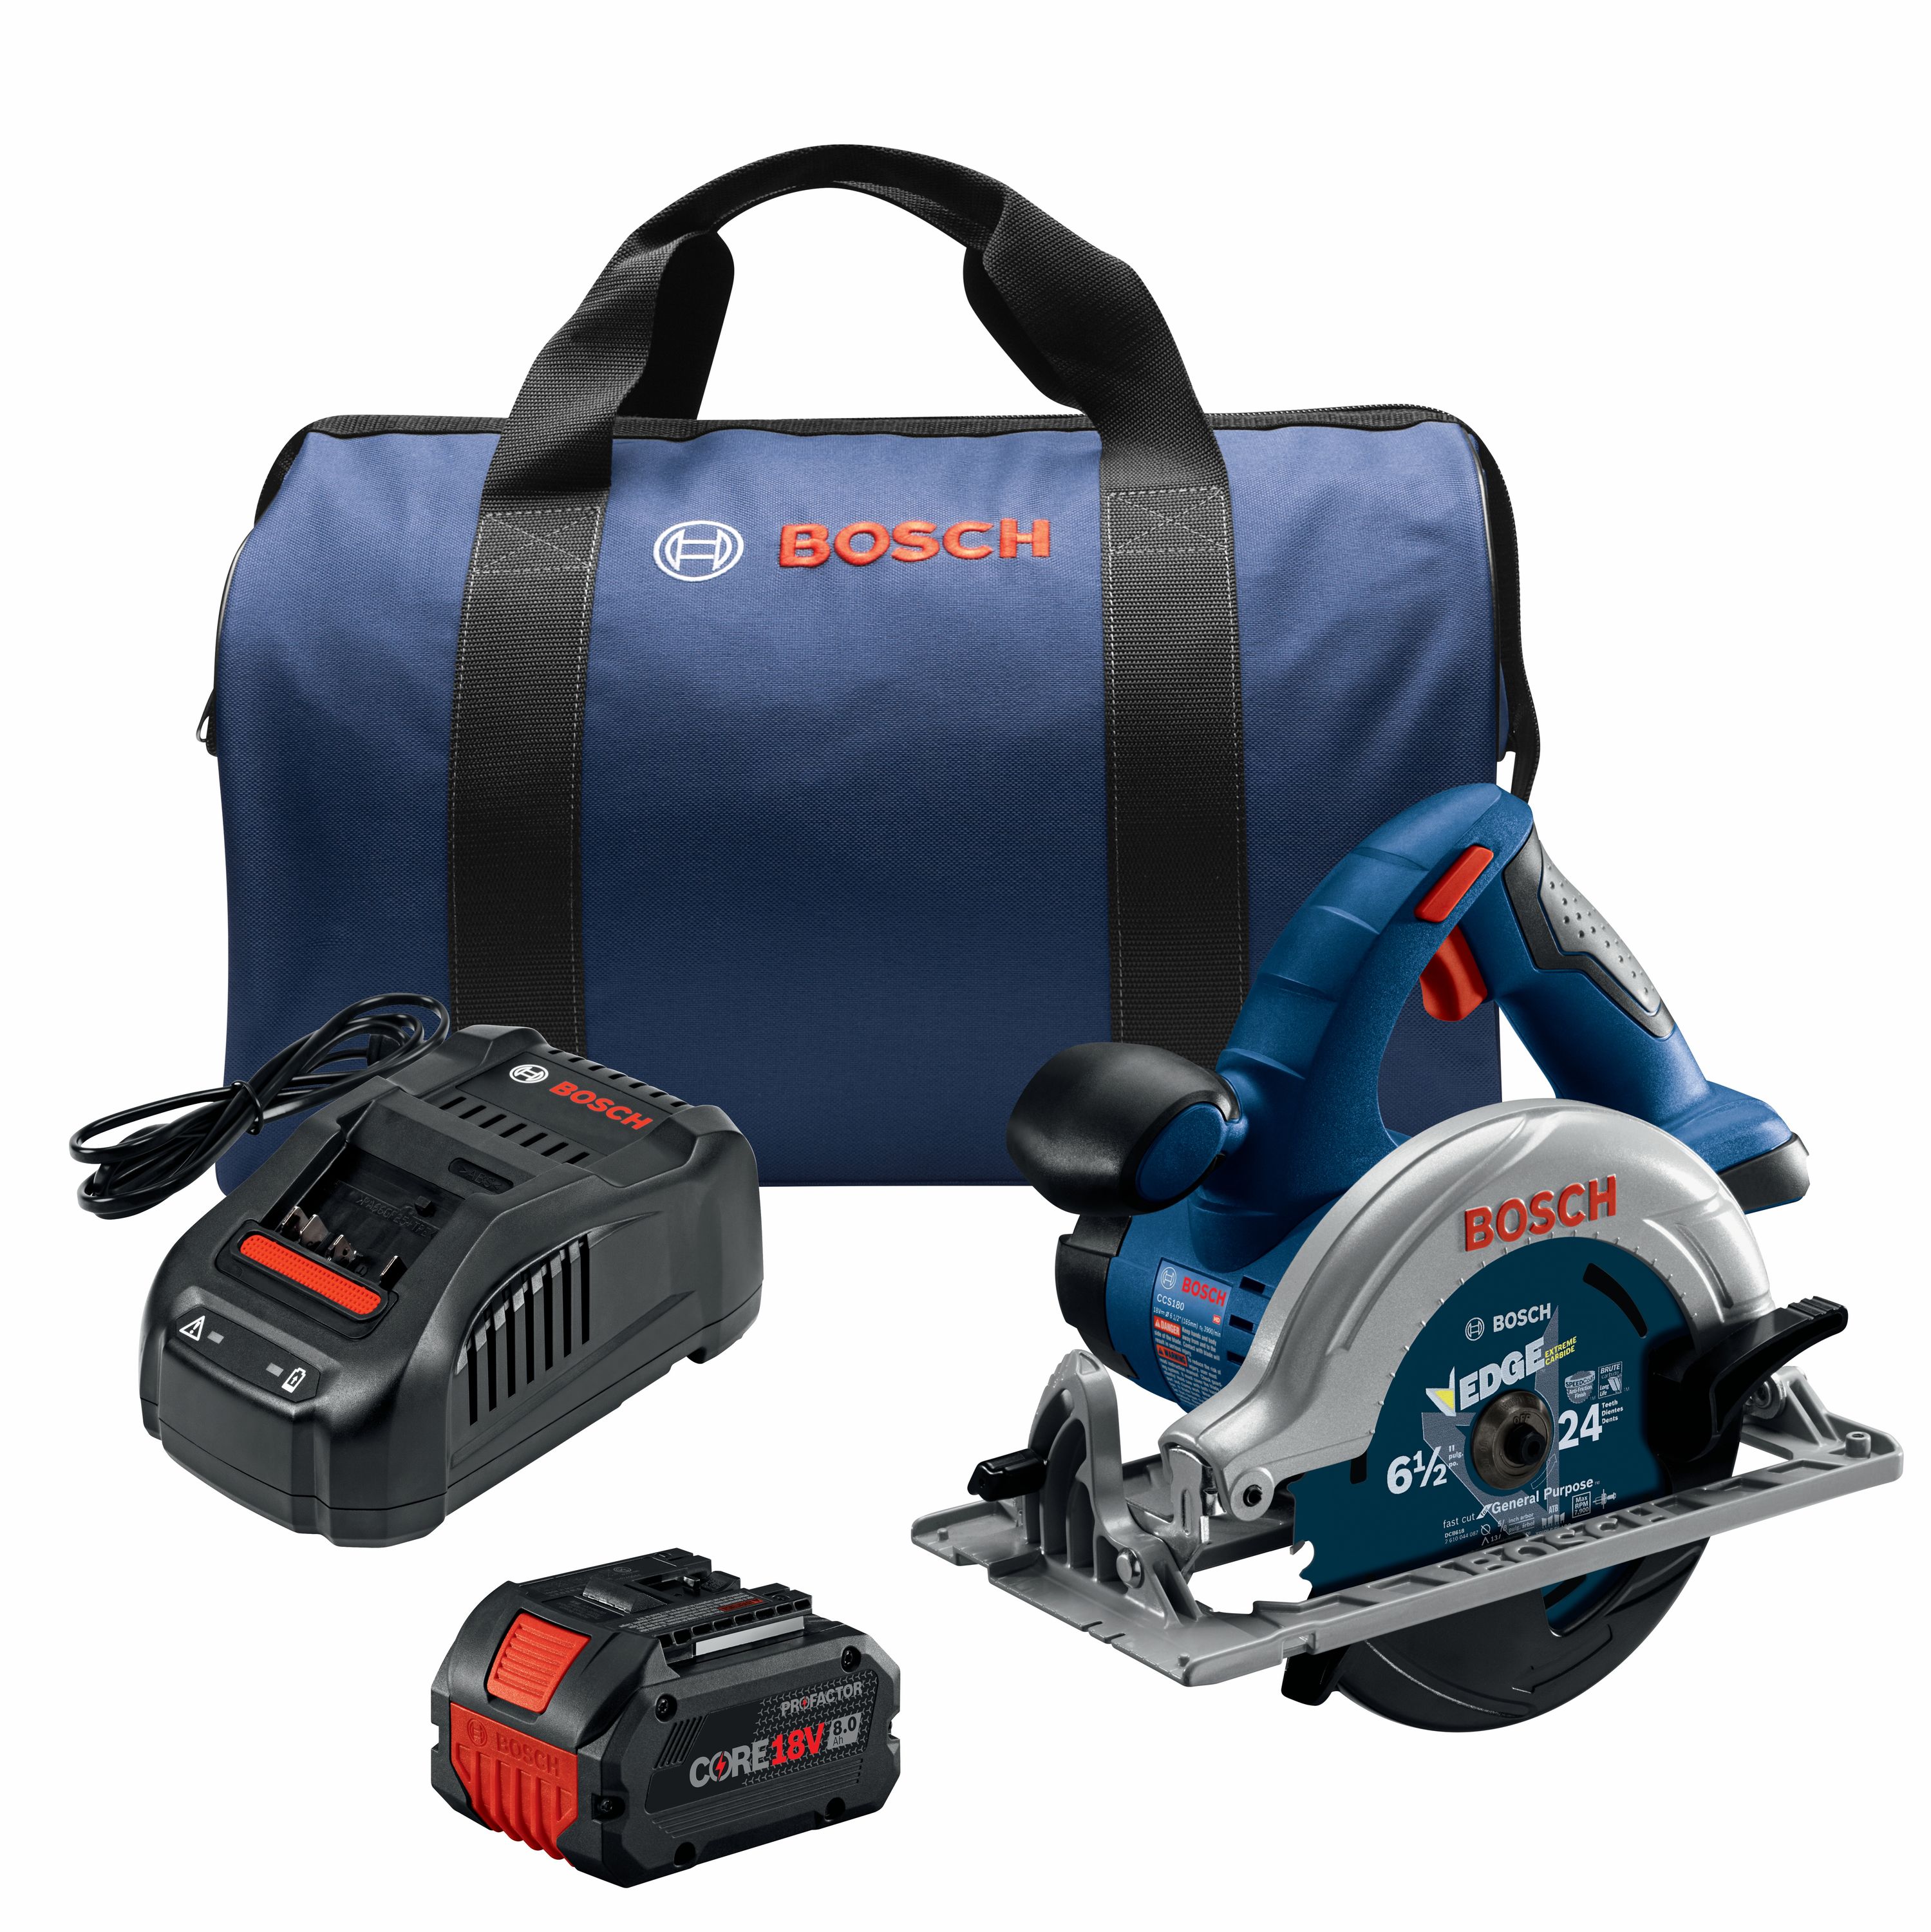 Bosch 93618DC 18 Volt Brute tough Drill/Driver/Circular Saw with 2